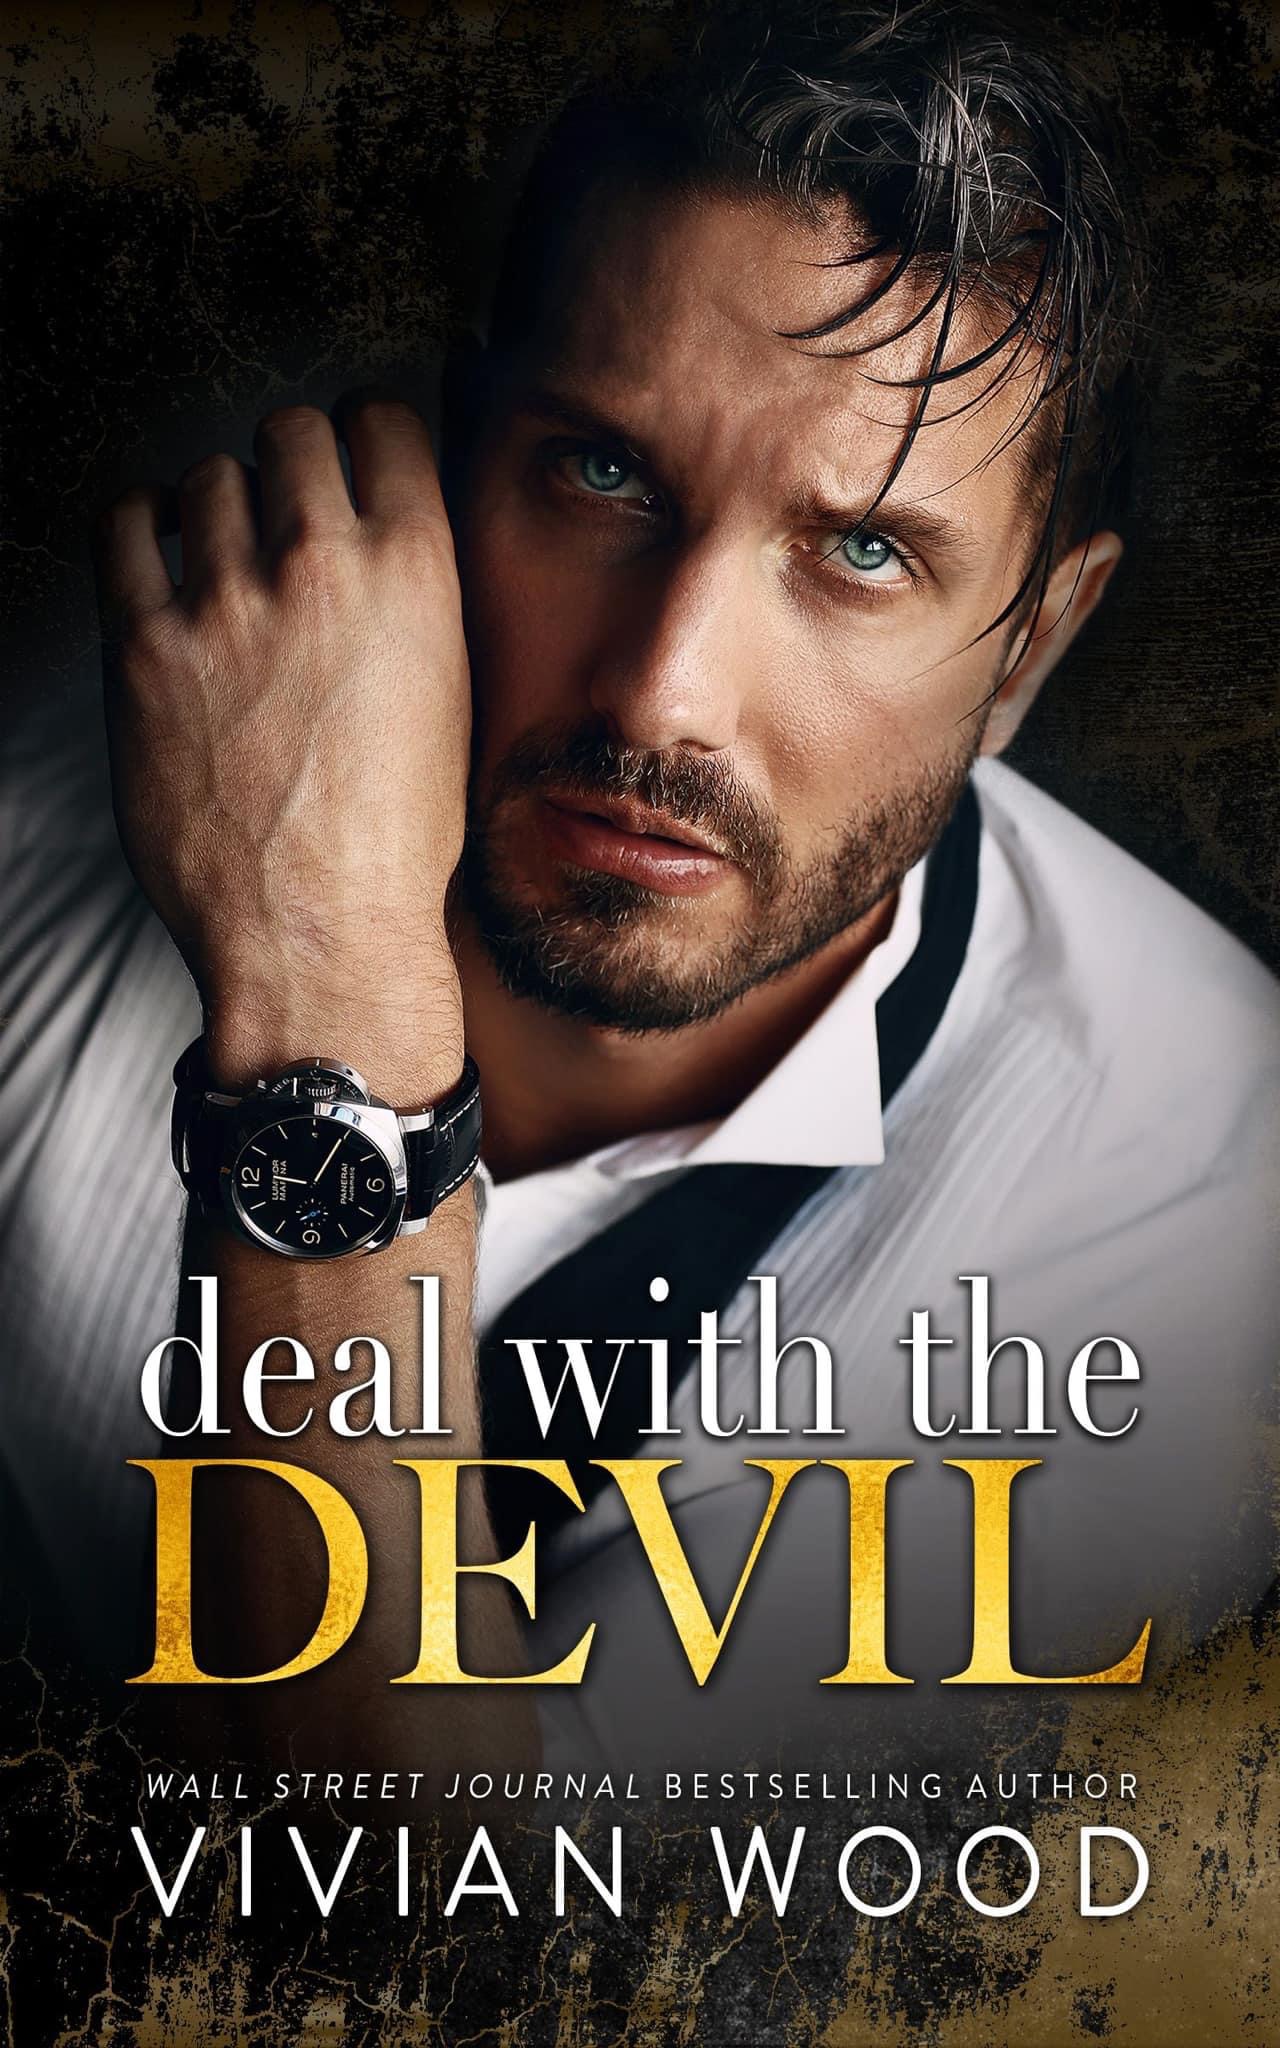 Deal With The Devil by Vivian Wood PDF Download